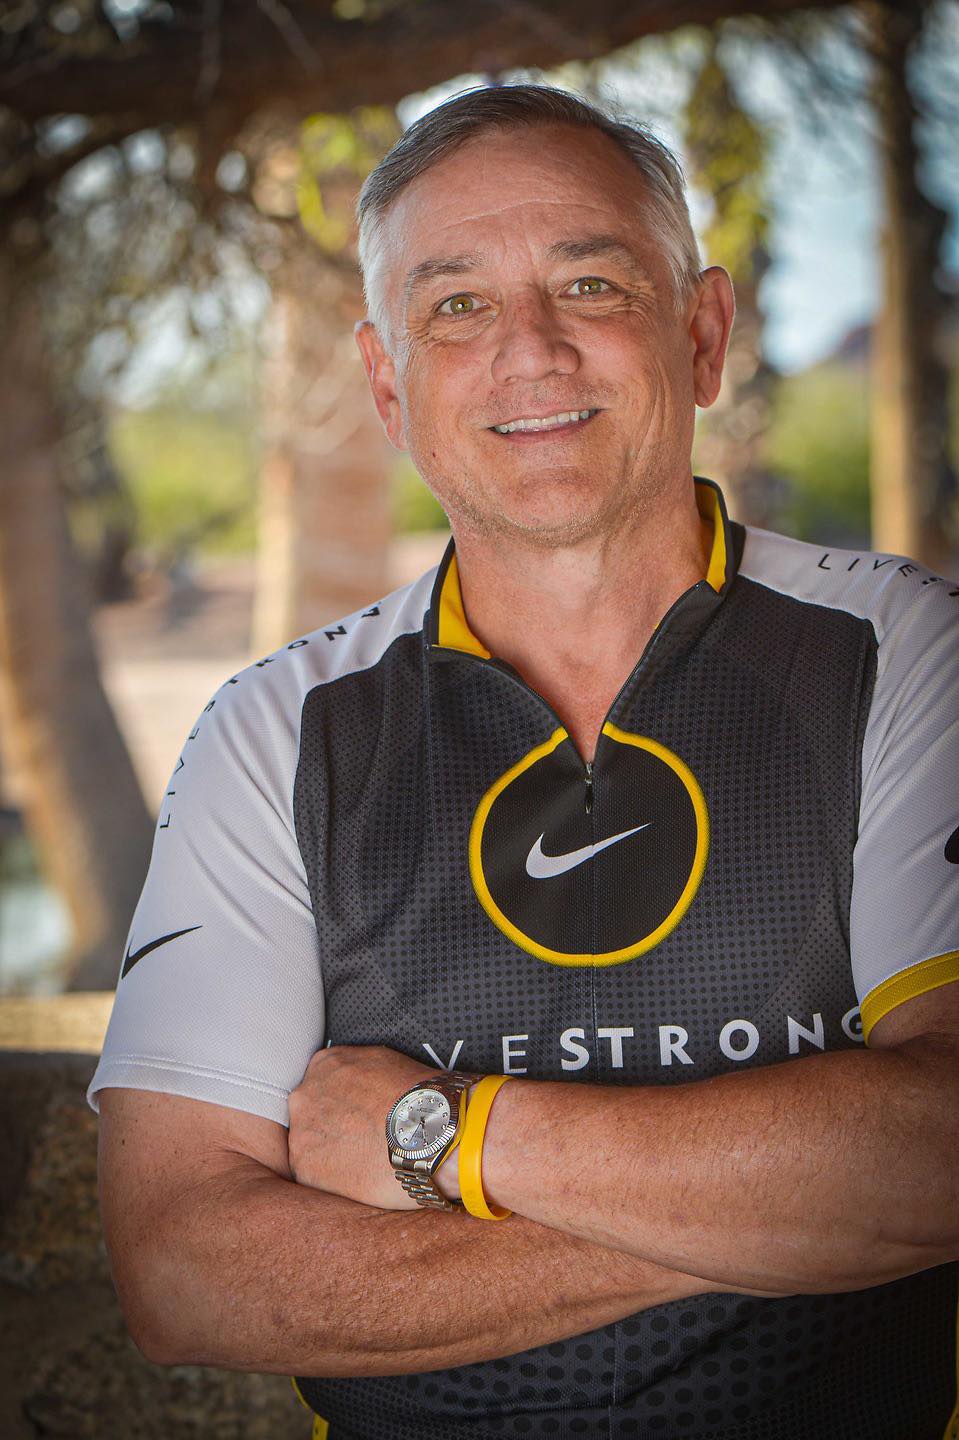 A smiling middle aged man outdoors wearing Livestrong gear